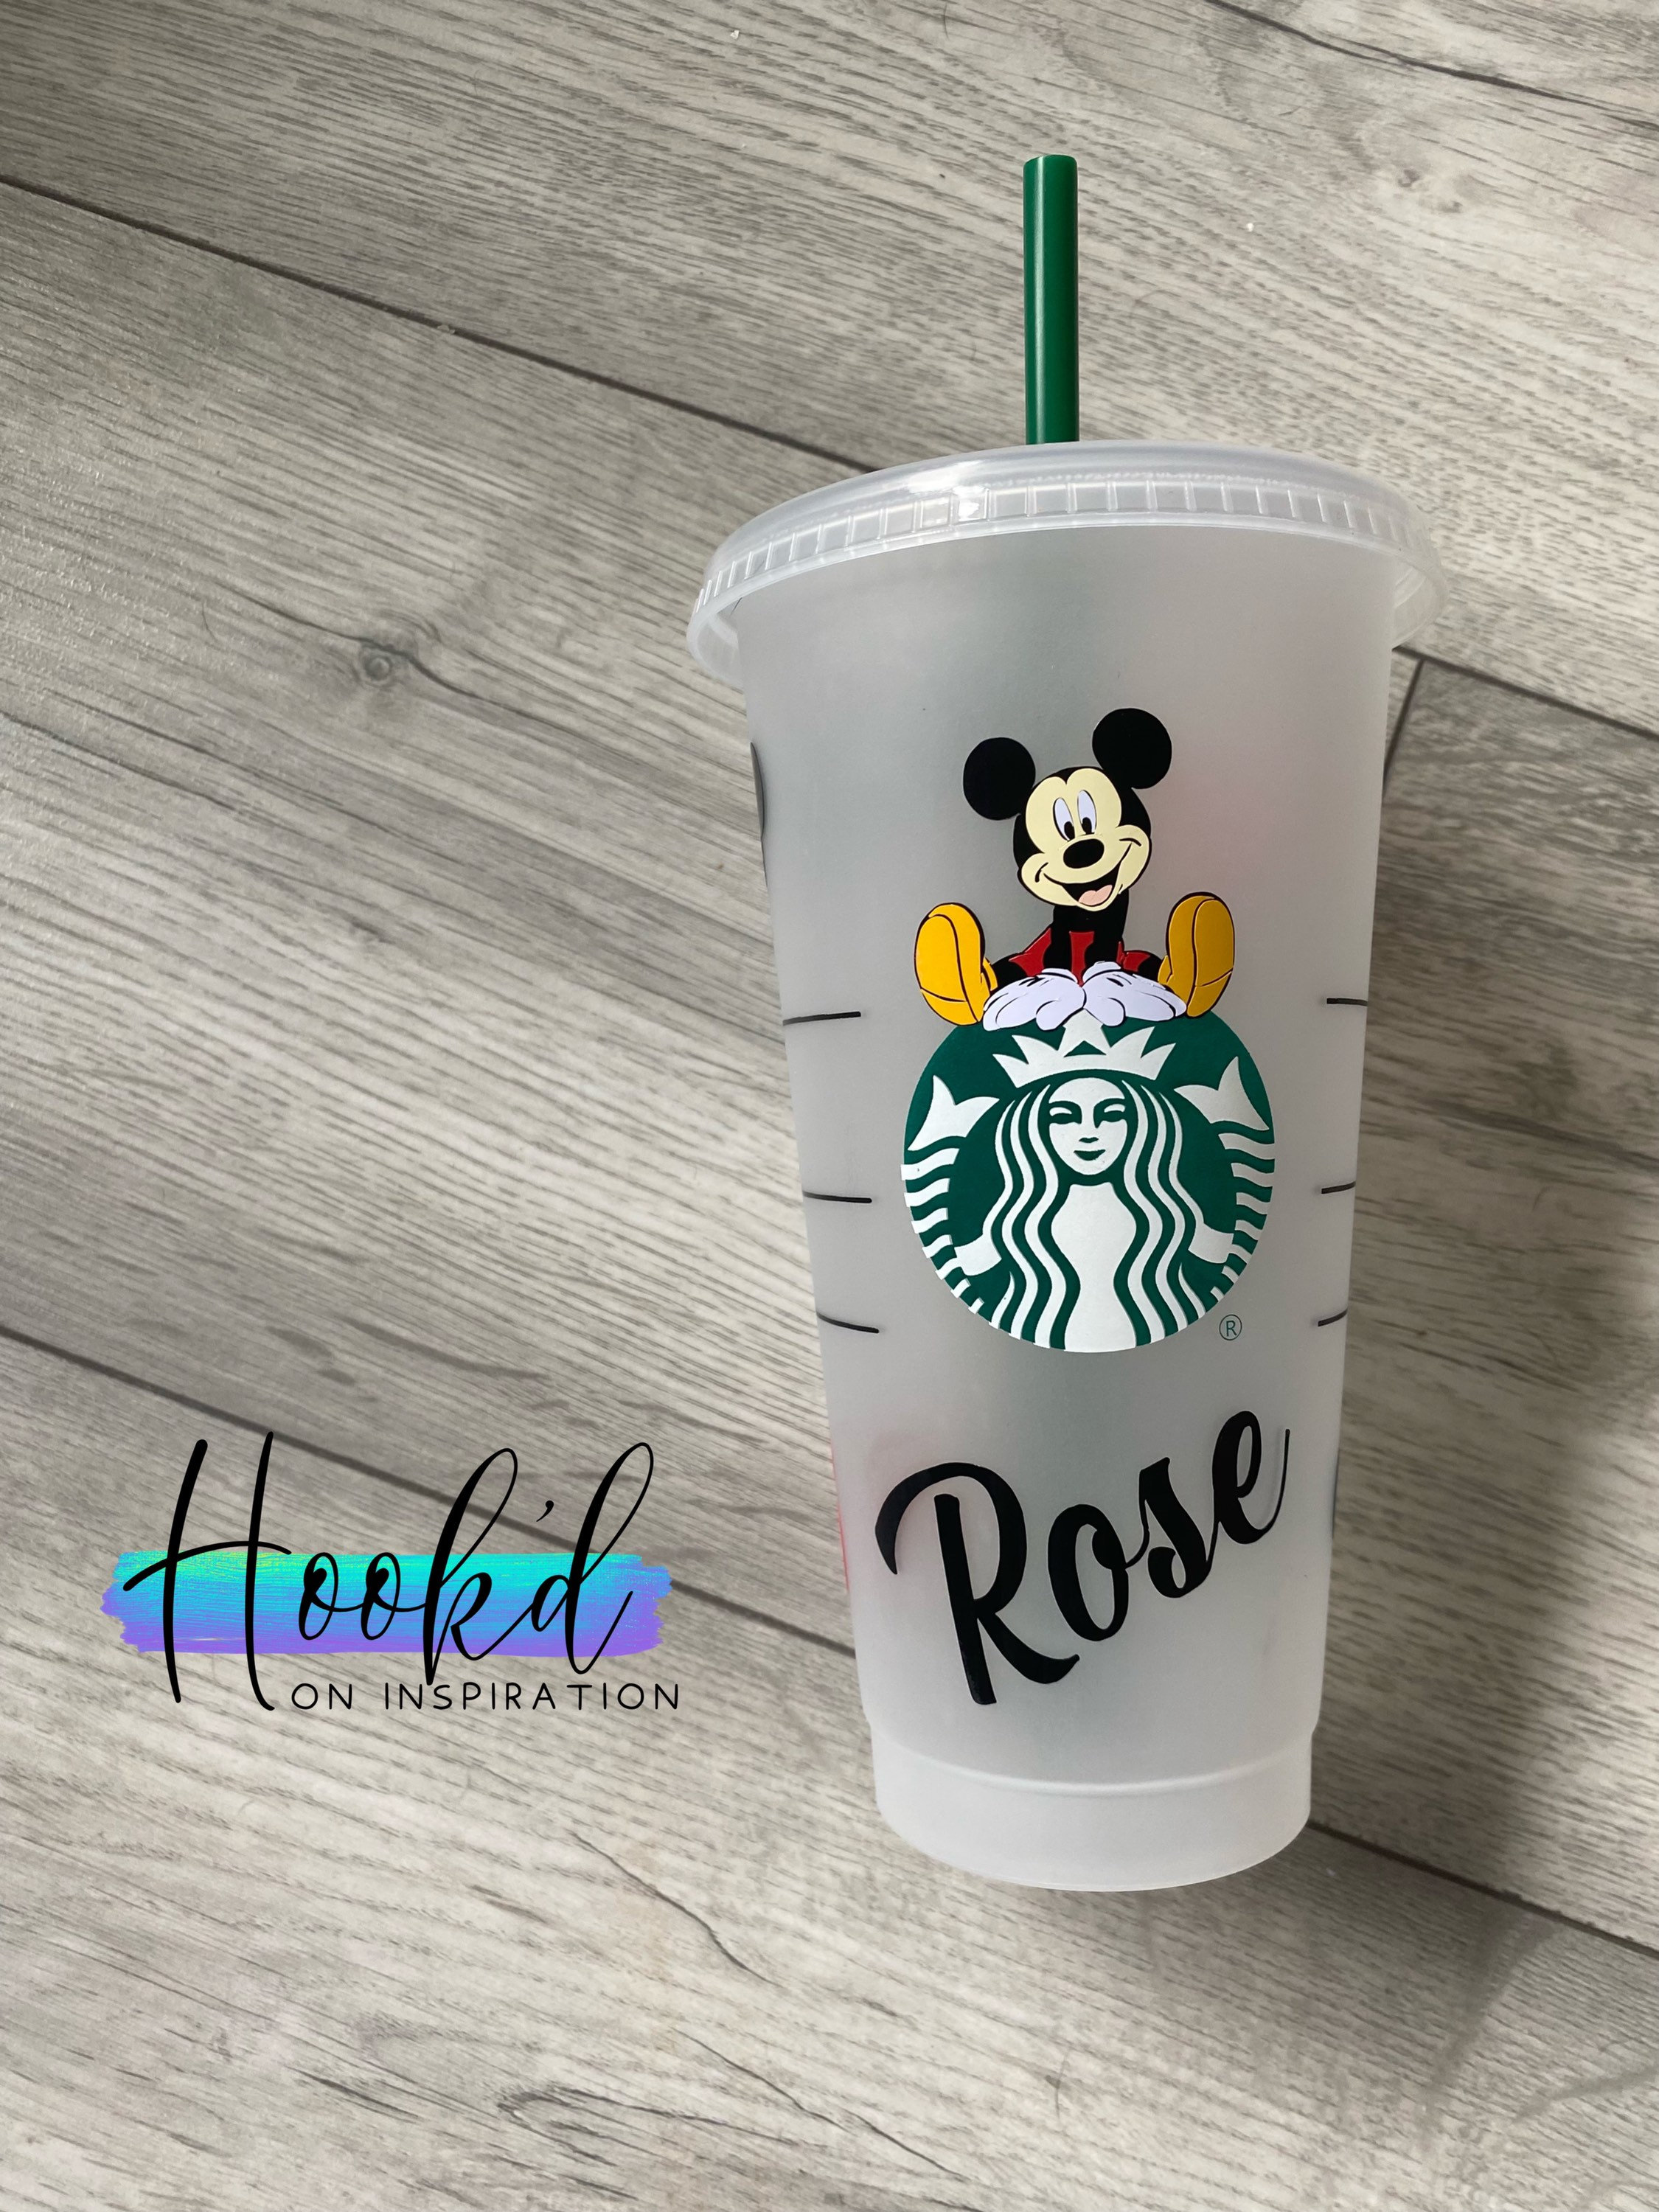 Mickey Mouse Inspired Starbucks Cup, Mickey Faces Starbucks Cup, Disney Cup,  Personalized Starbucks Cup, Mickey Mouse Cup 